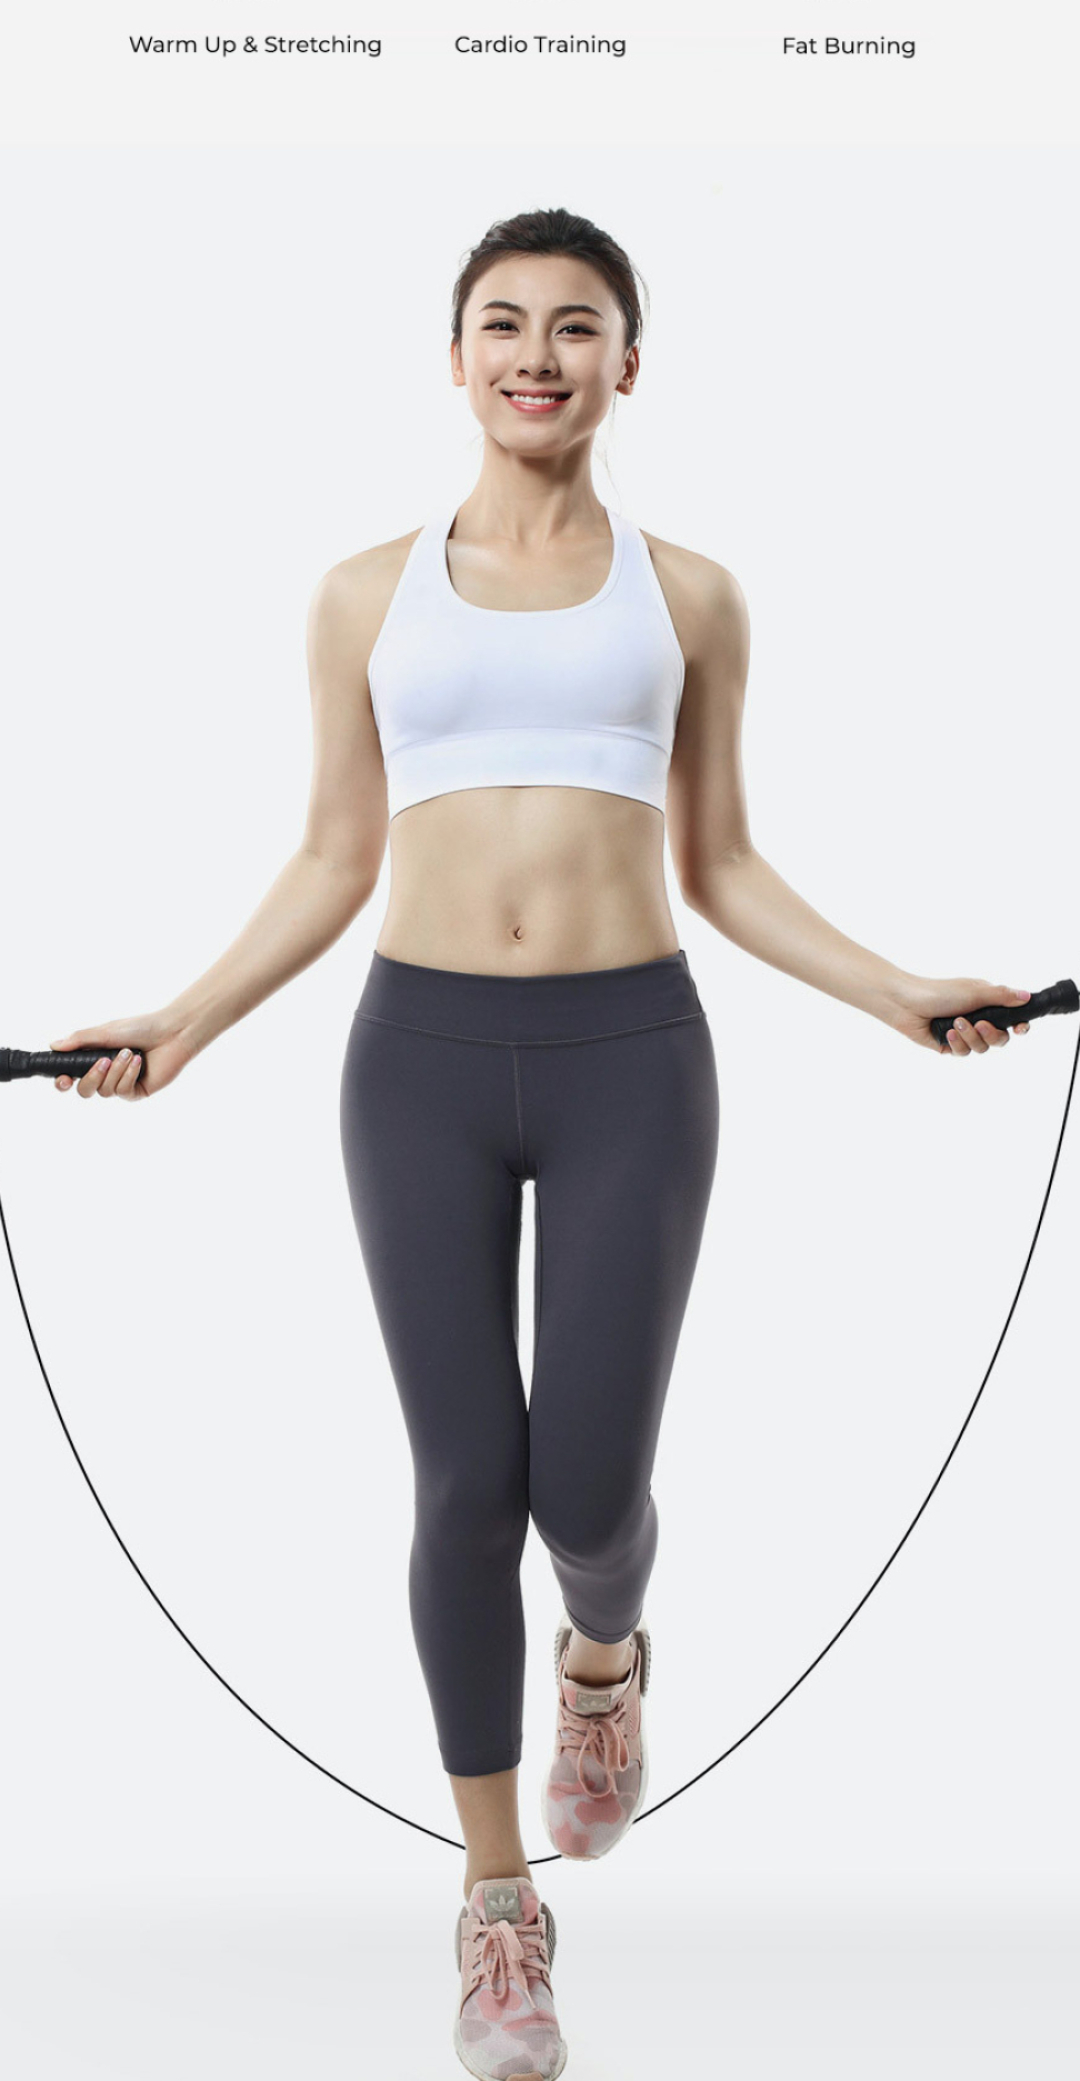 Rope Jumping: NASM-certified personal trainer, Best exercises for weight loss, YUNMAI Smart Jump Rope. 1080x2090 HD Background.